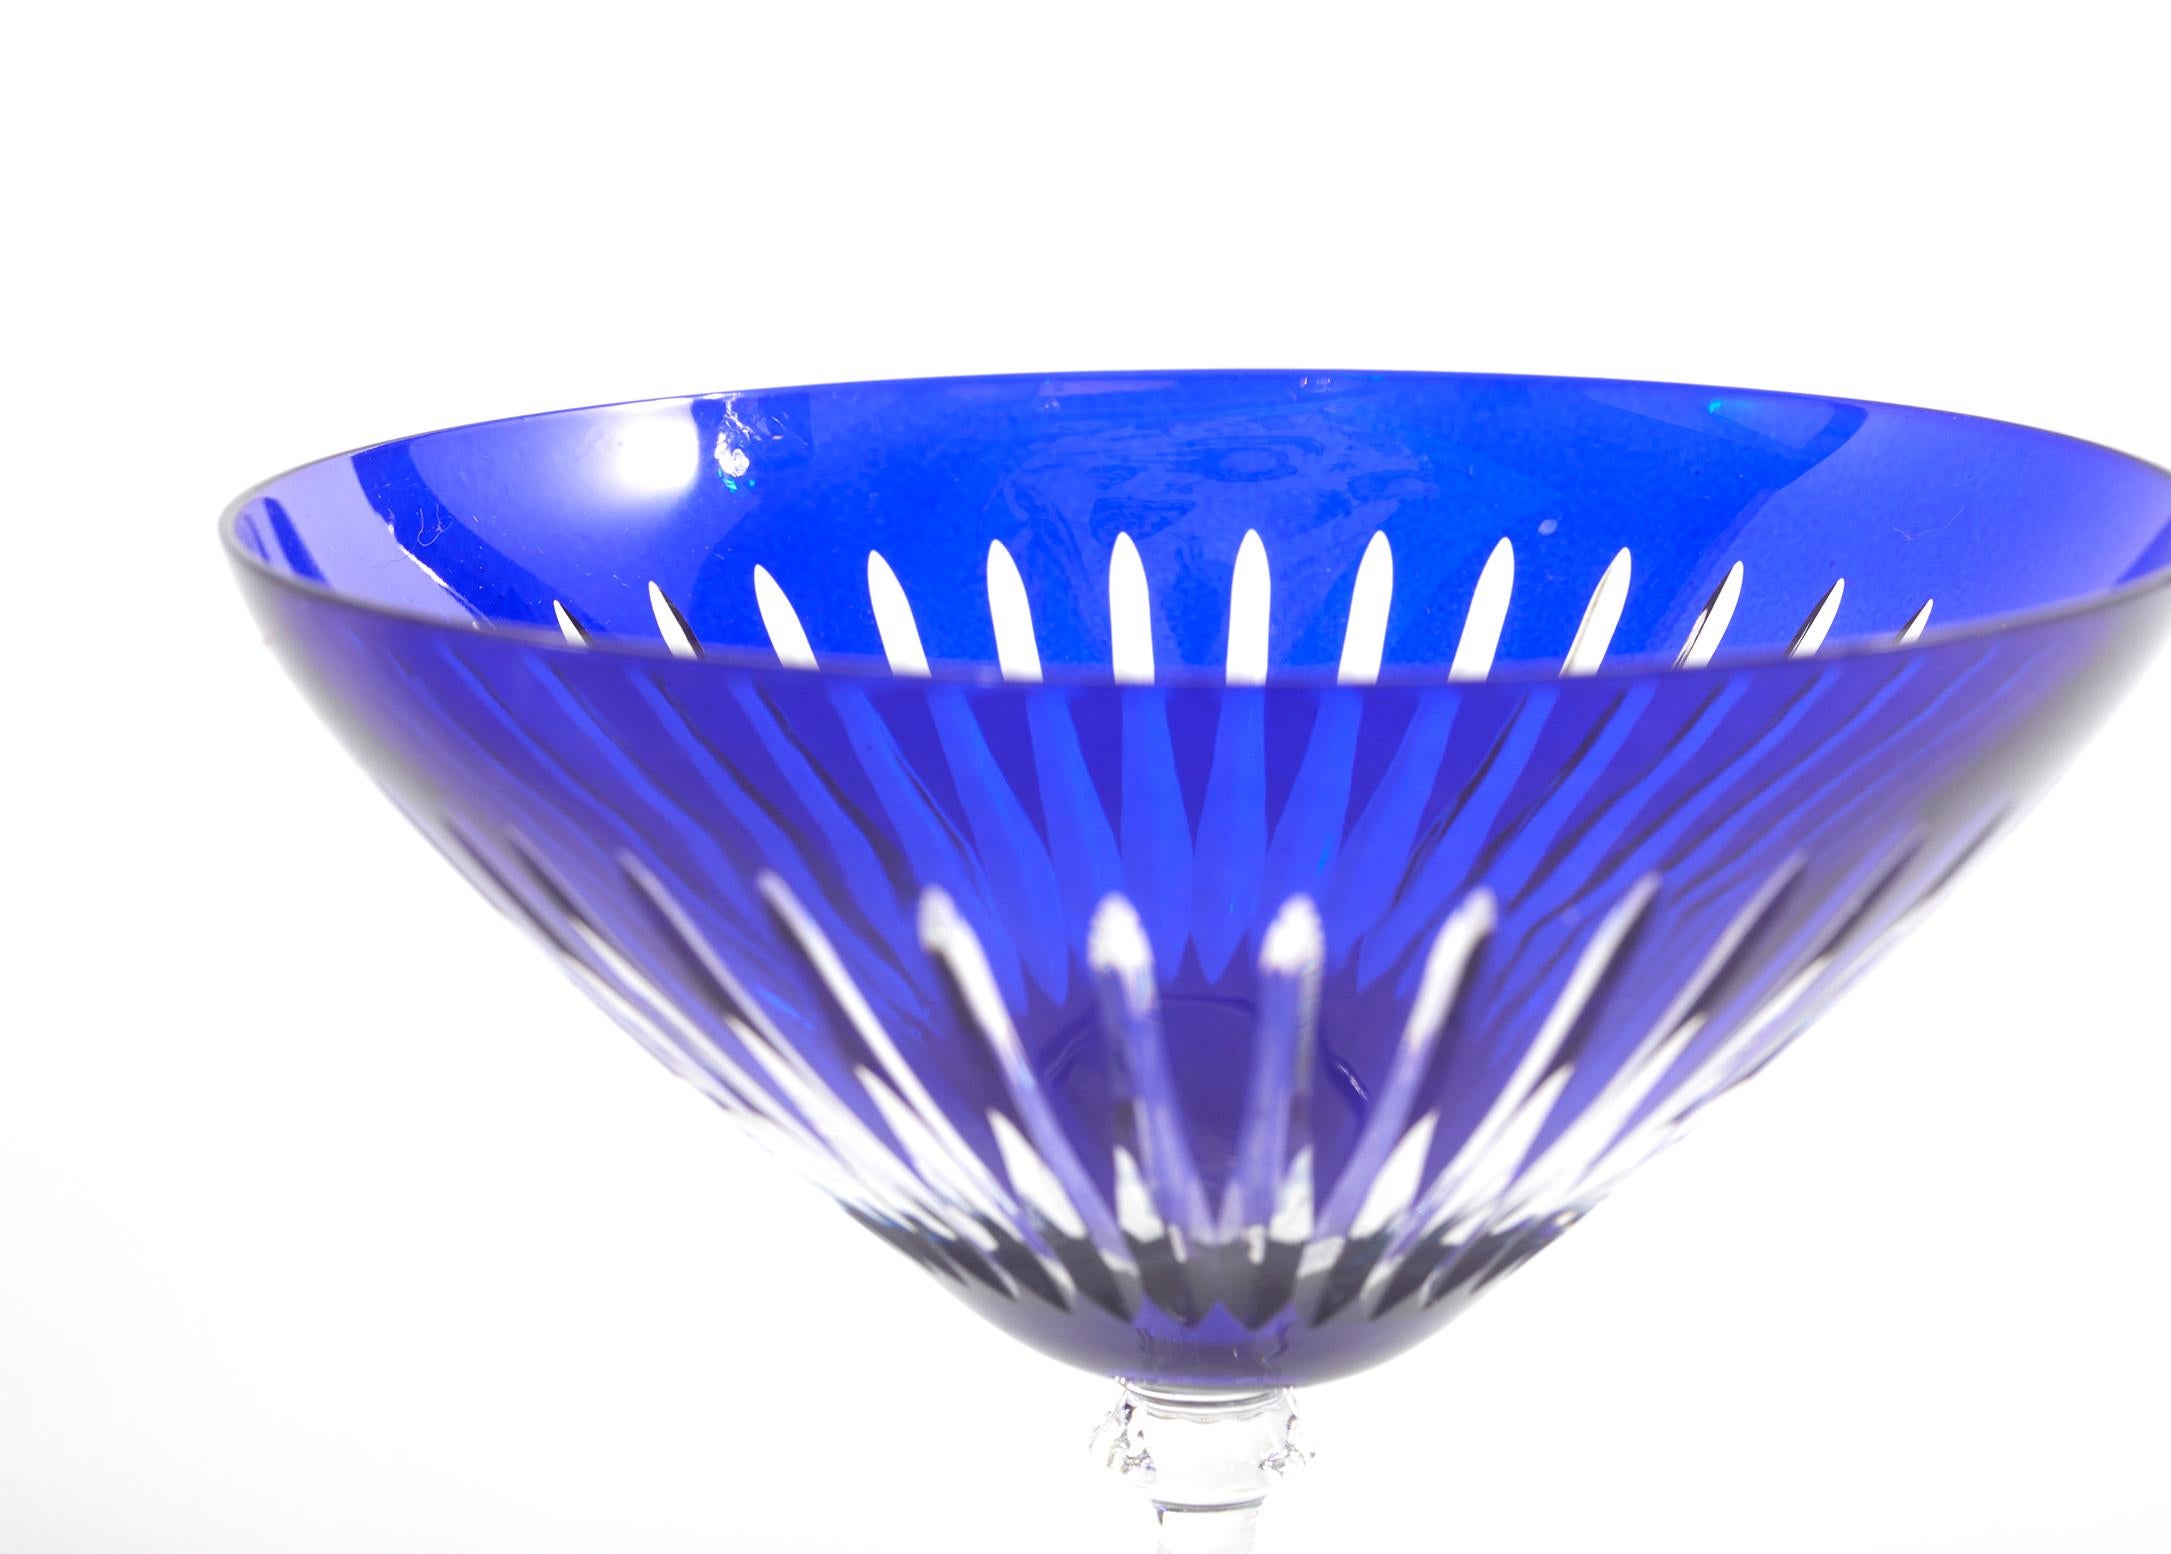 Late 20th century France cut crystal Cobalt blue with clear stem barware / tableware martini service for 11 people. Each glass is in great condition. Minor wear. Each one stands about 6.5 inches tall x 5 inches diameter.